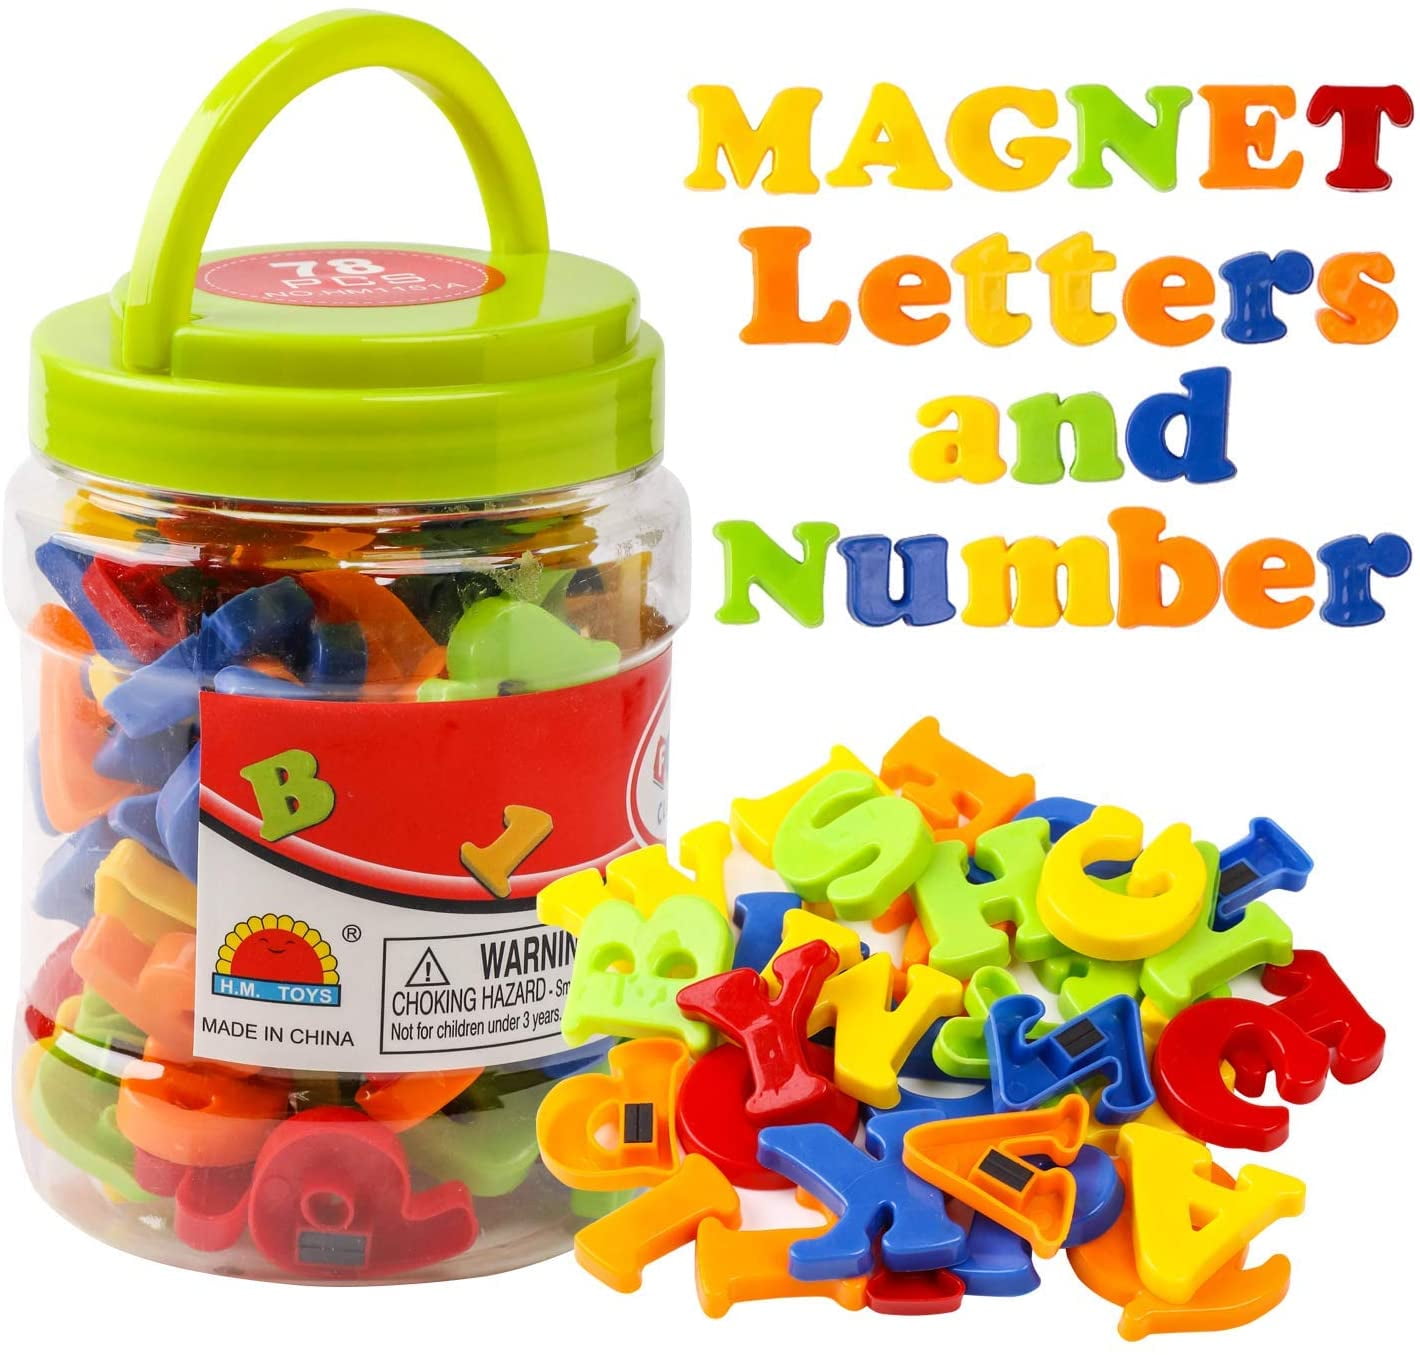 MATH ALPHABET/ NUMBERS FRIDGE MAGNETS LETTER MAGNETIC 52 pc COLORFUL ABC 